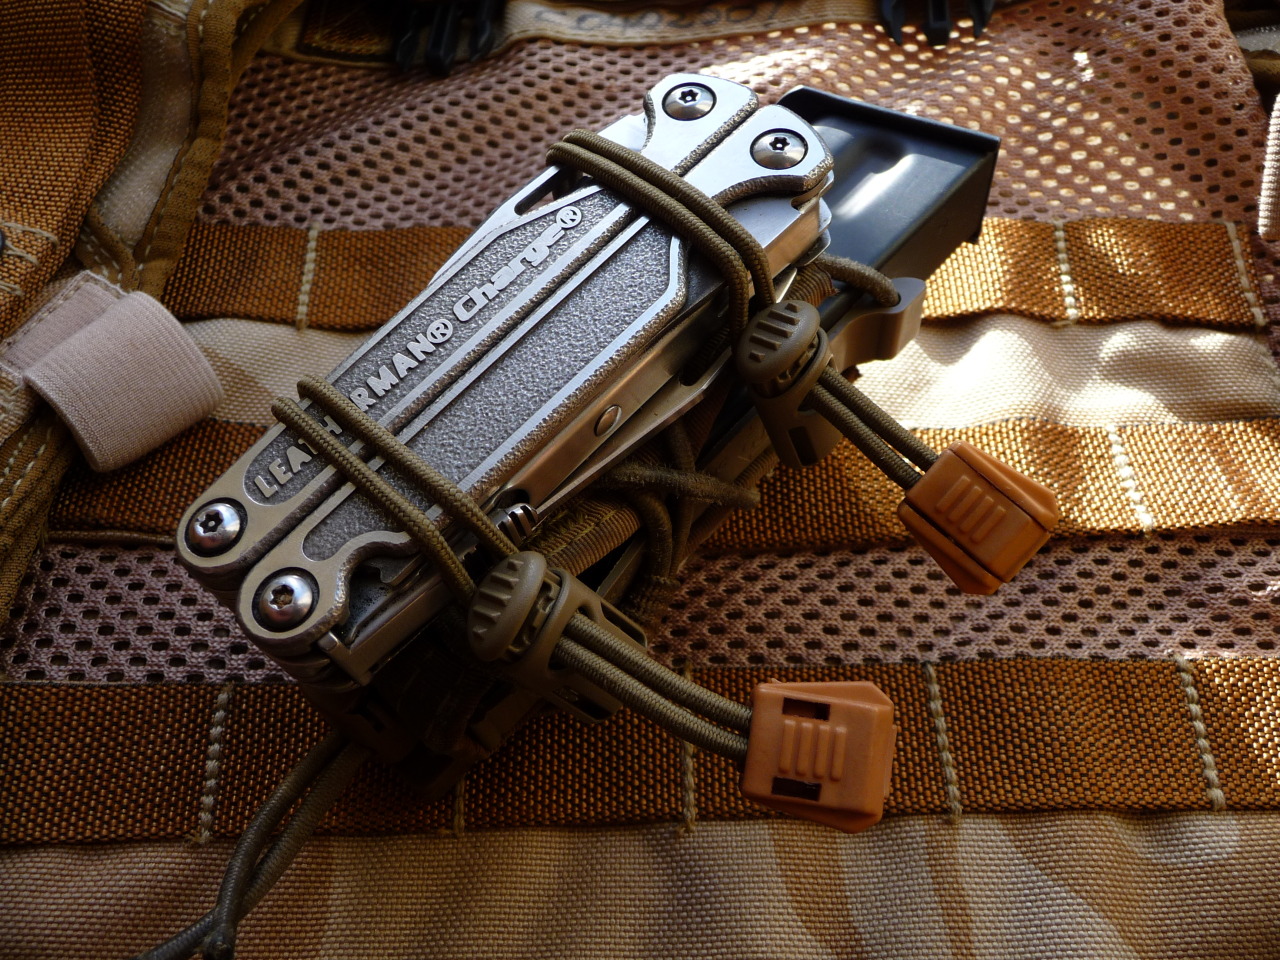 ru-titley-knives:  As I had some of my High speed gear tacos off my EDC belt for